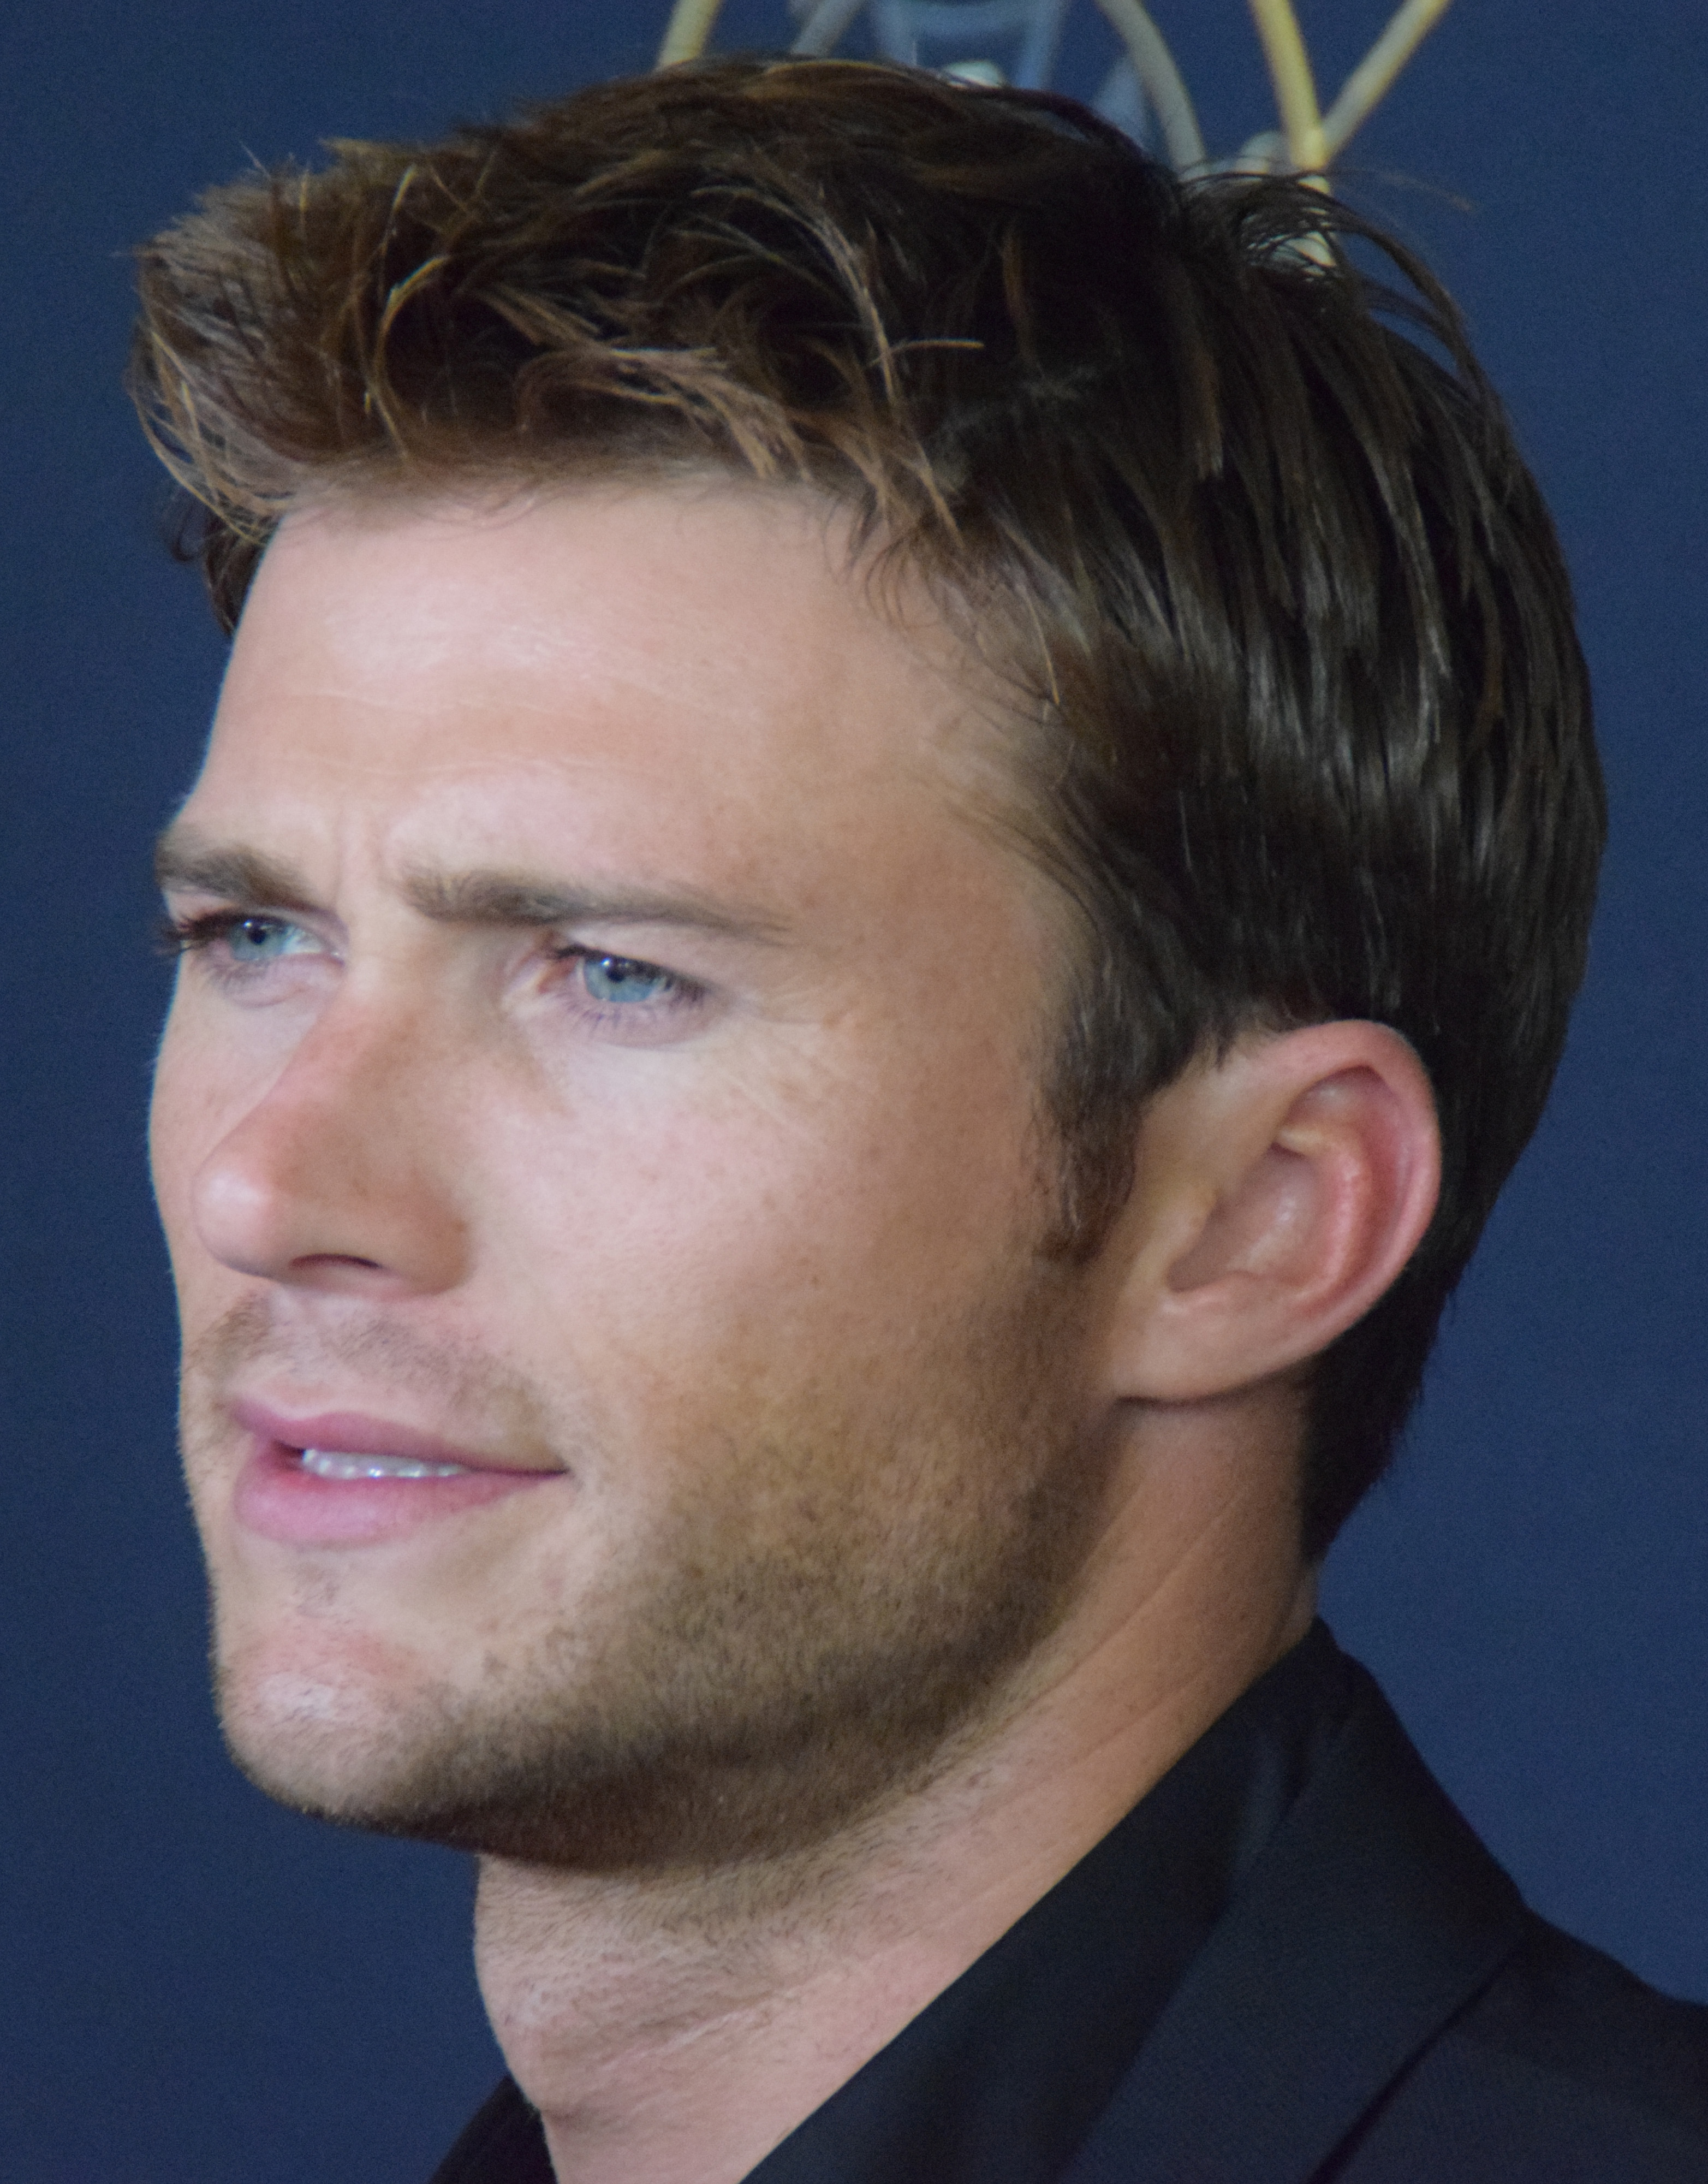 Scott_Eastwood_52nd_Annual_Publicists_Awards_-_Feb_2015_%28cropped%29.jpg